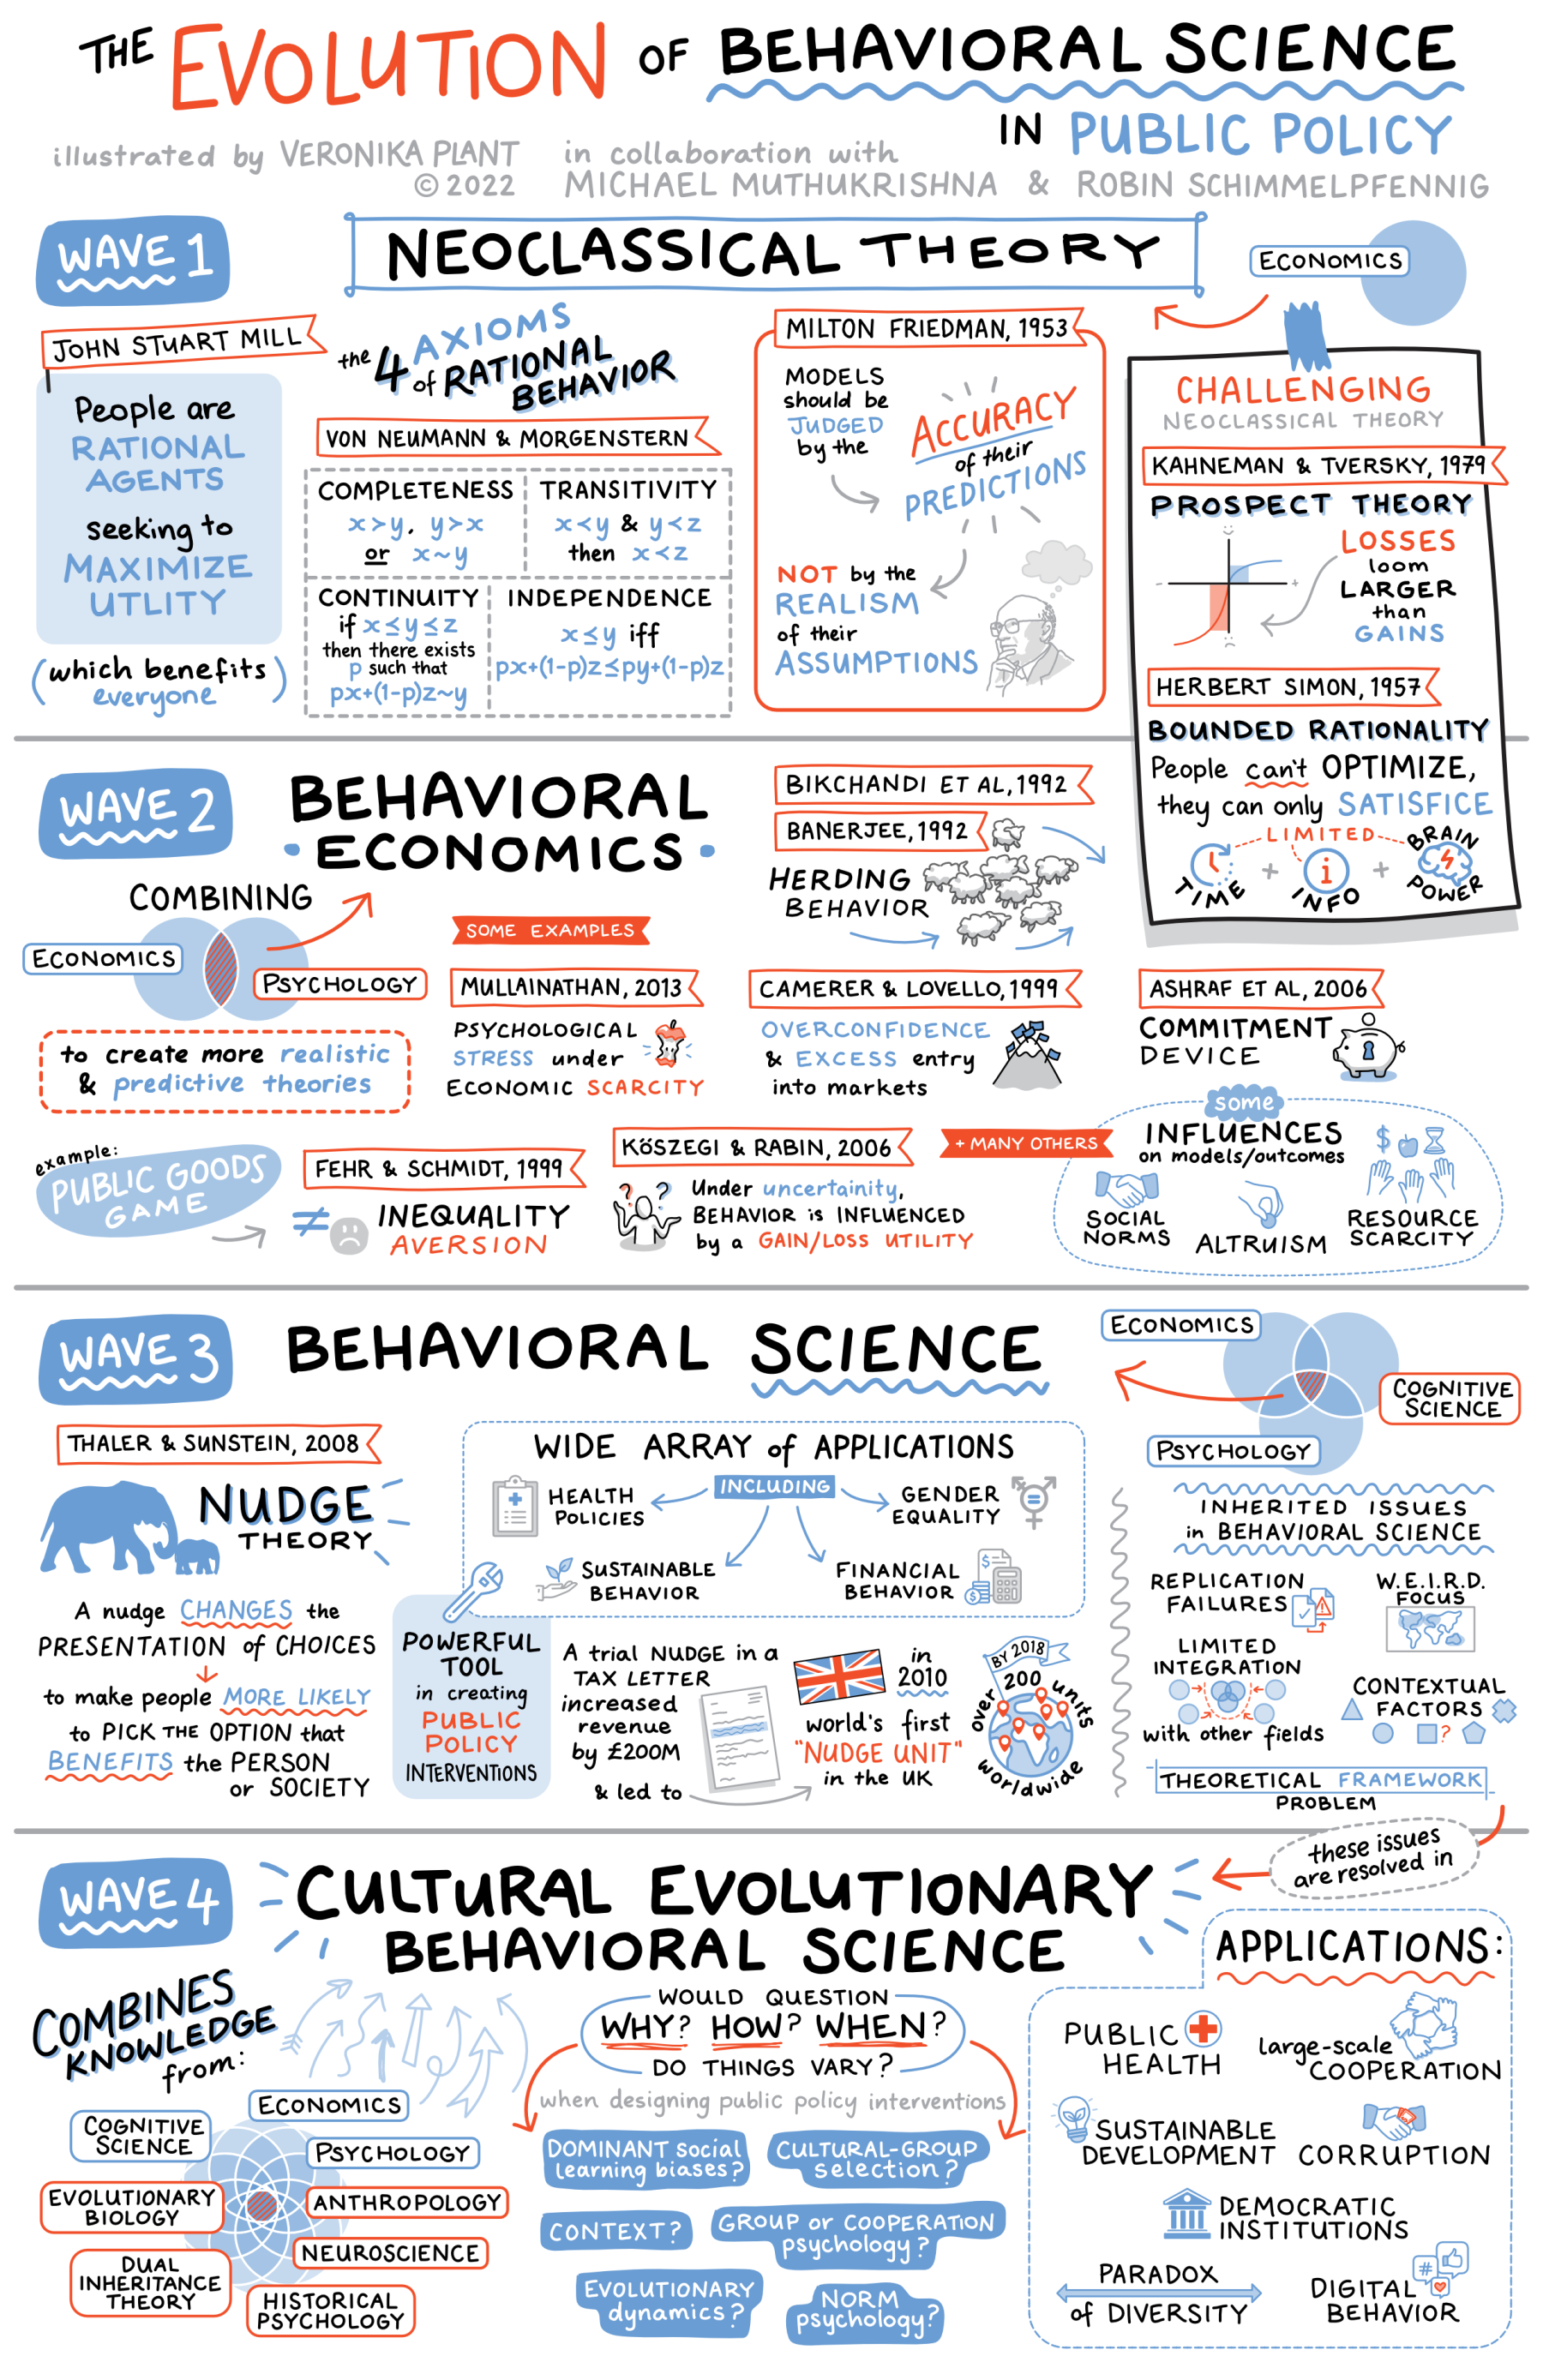 Pictured above: The Evolution of Behavioral Science Illustration by Veronika Plant - Cultural Evolutionary Behavioral Science in Public Policy - except from Schimmelpfennig and Muthukrishna book